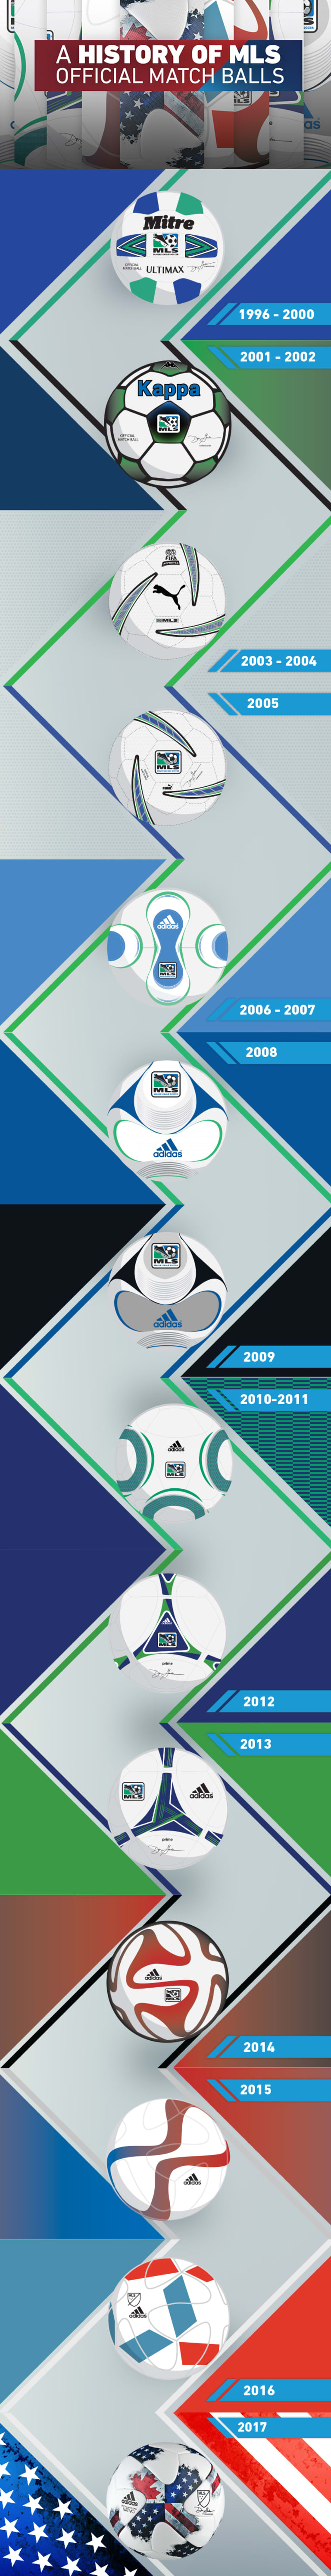 A visual history of official MLS match balls - https://league-mp7static.mlsdigital.net/images/History-of-Ball-infographic-4.jpeg?null